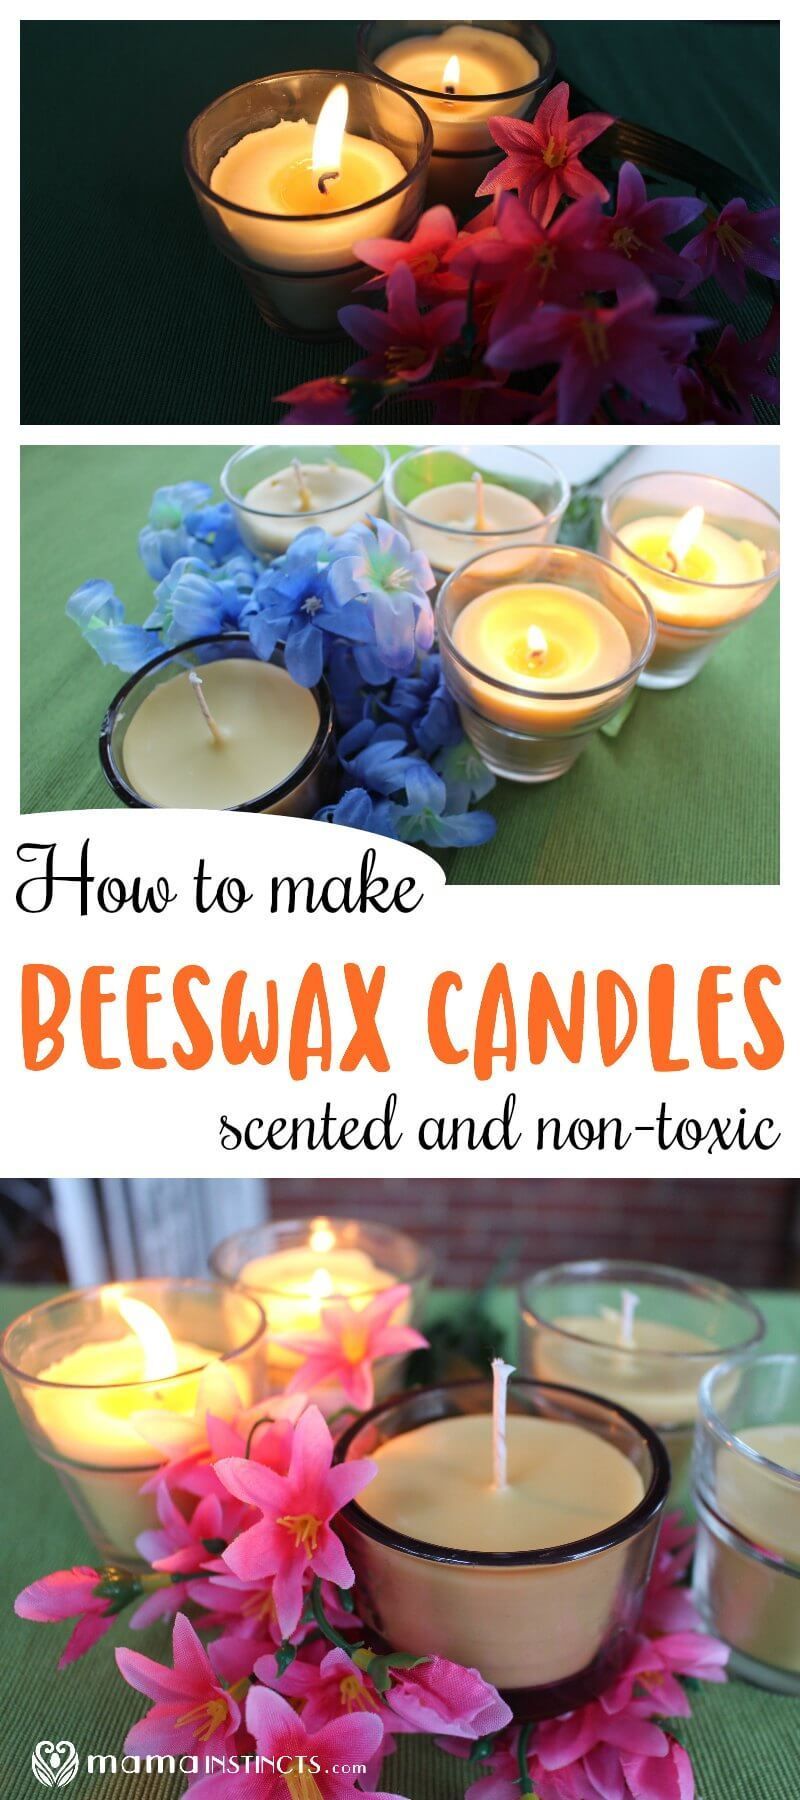 How to Make Beeswax Candles {Scented and Non-Toxic} – Mama Instincts® - How to Make Beeswax Candles {Scented and Non-Toxic} – Mama Instincts® -   15 diy Candles sticks ideas